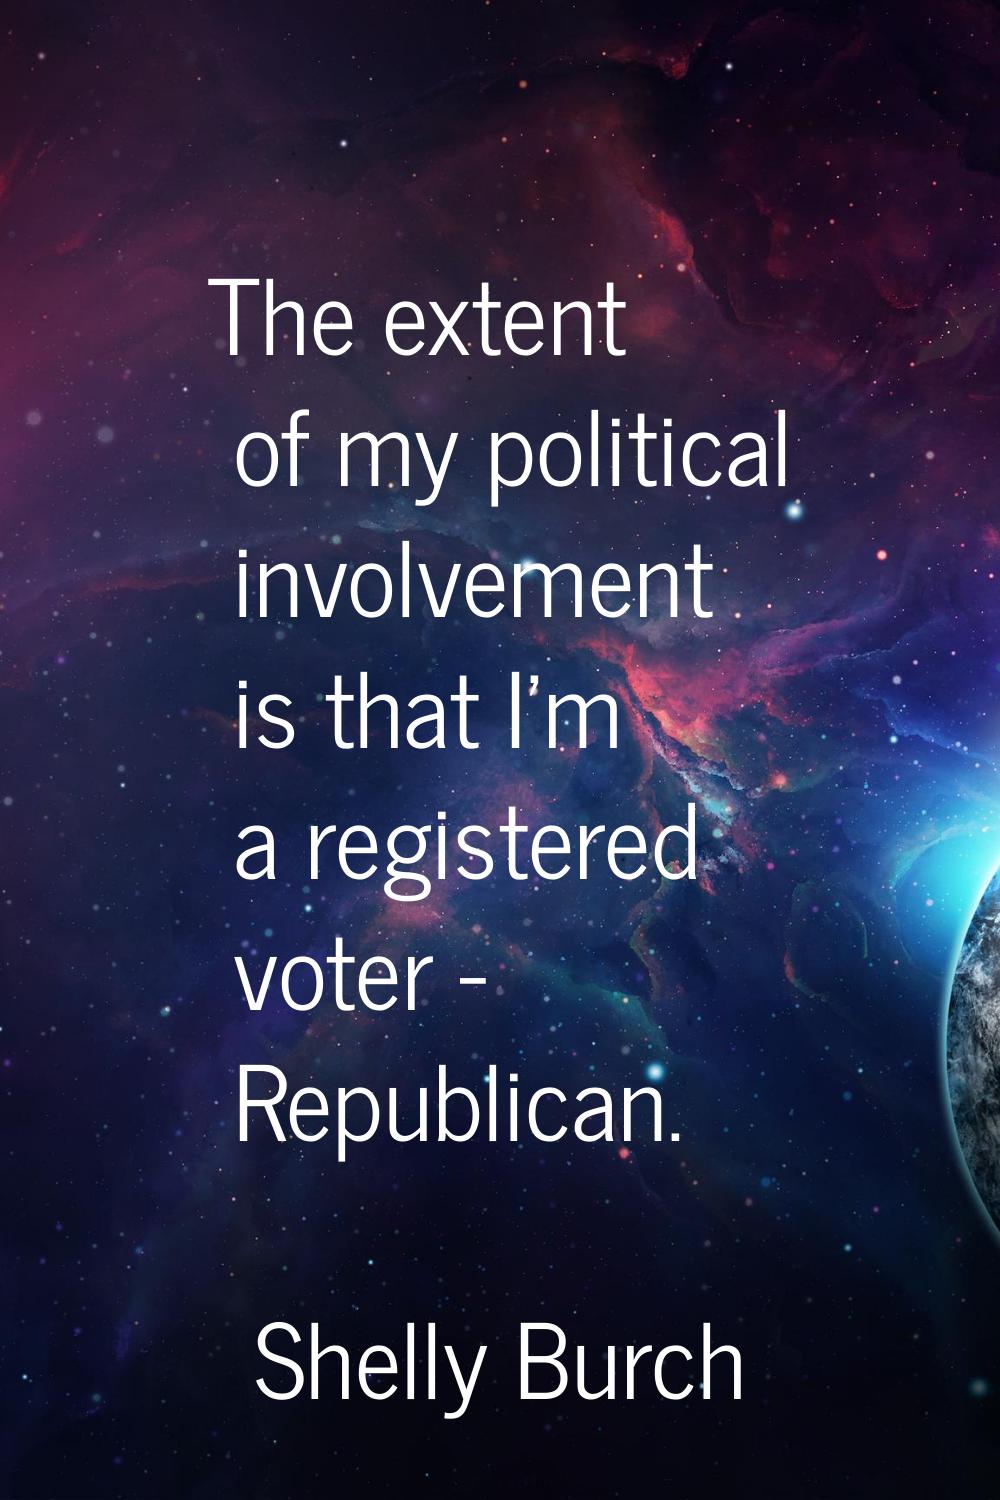 The extent of my political involvement is that I'm a registered voter - Republican.